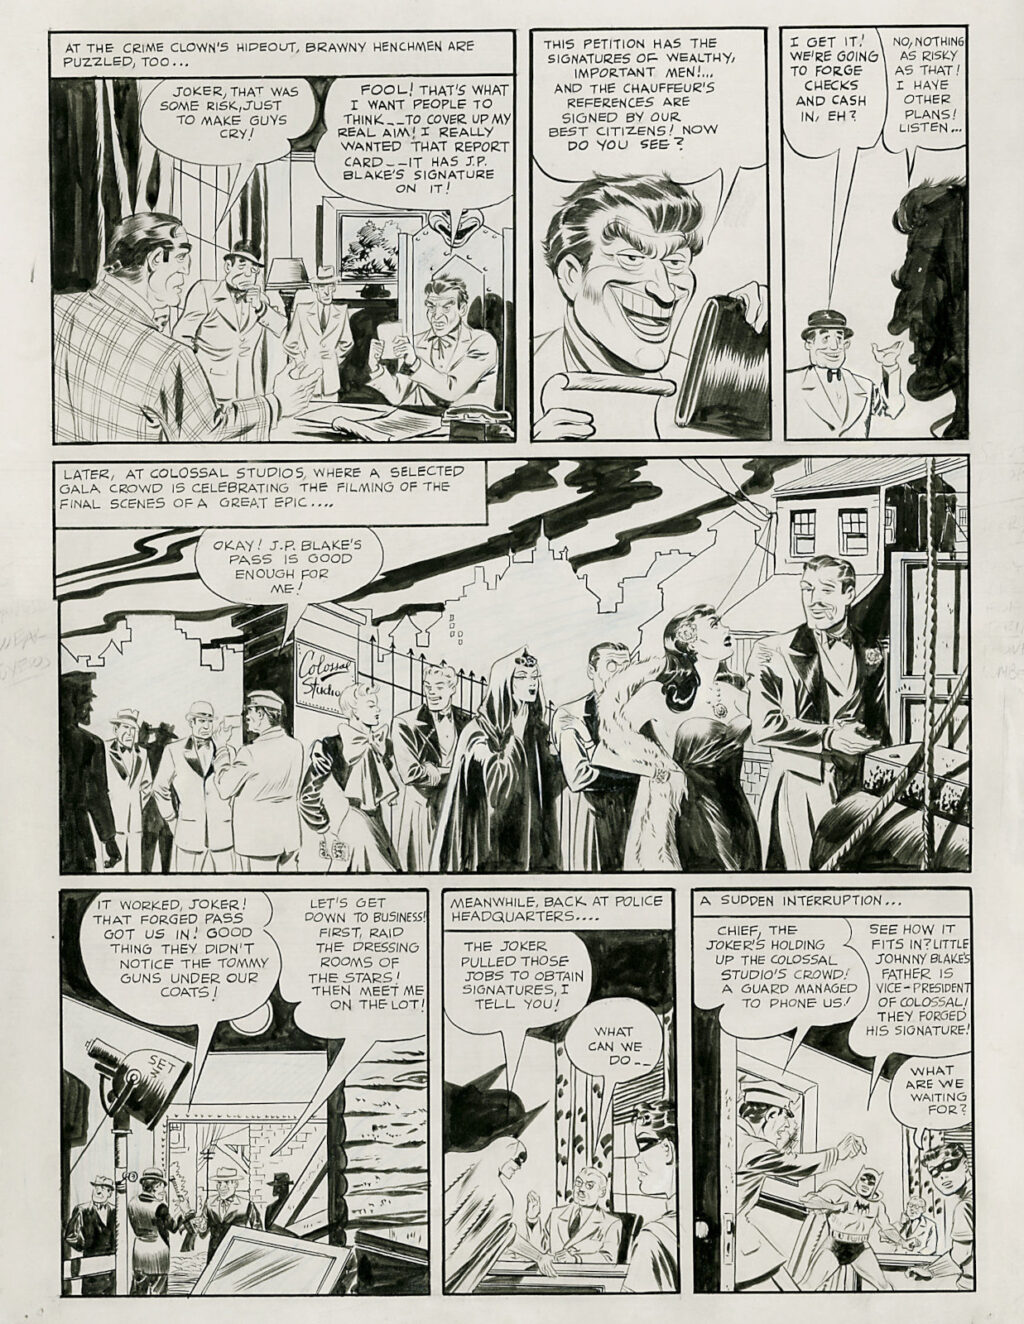 Batman issue 13 page 4 by Jerry Robinson and George Roussos